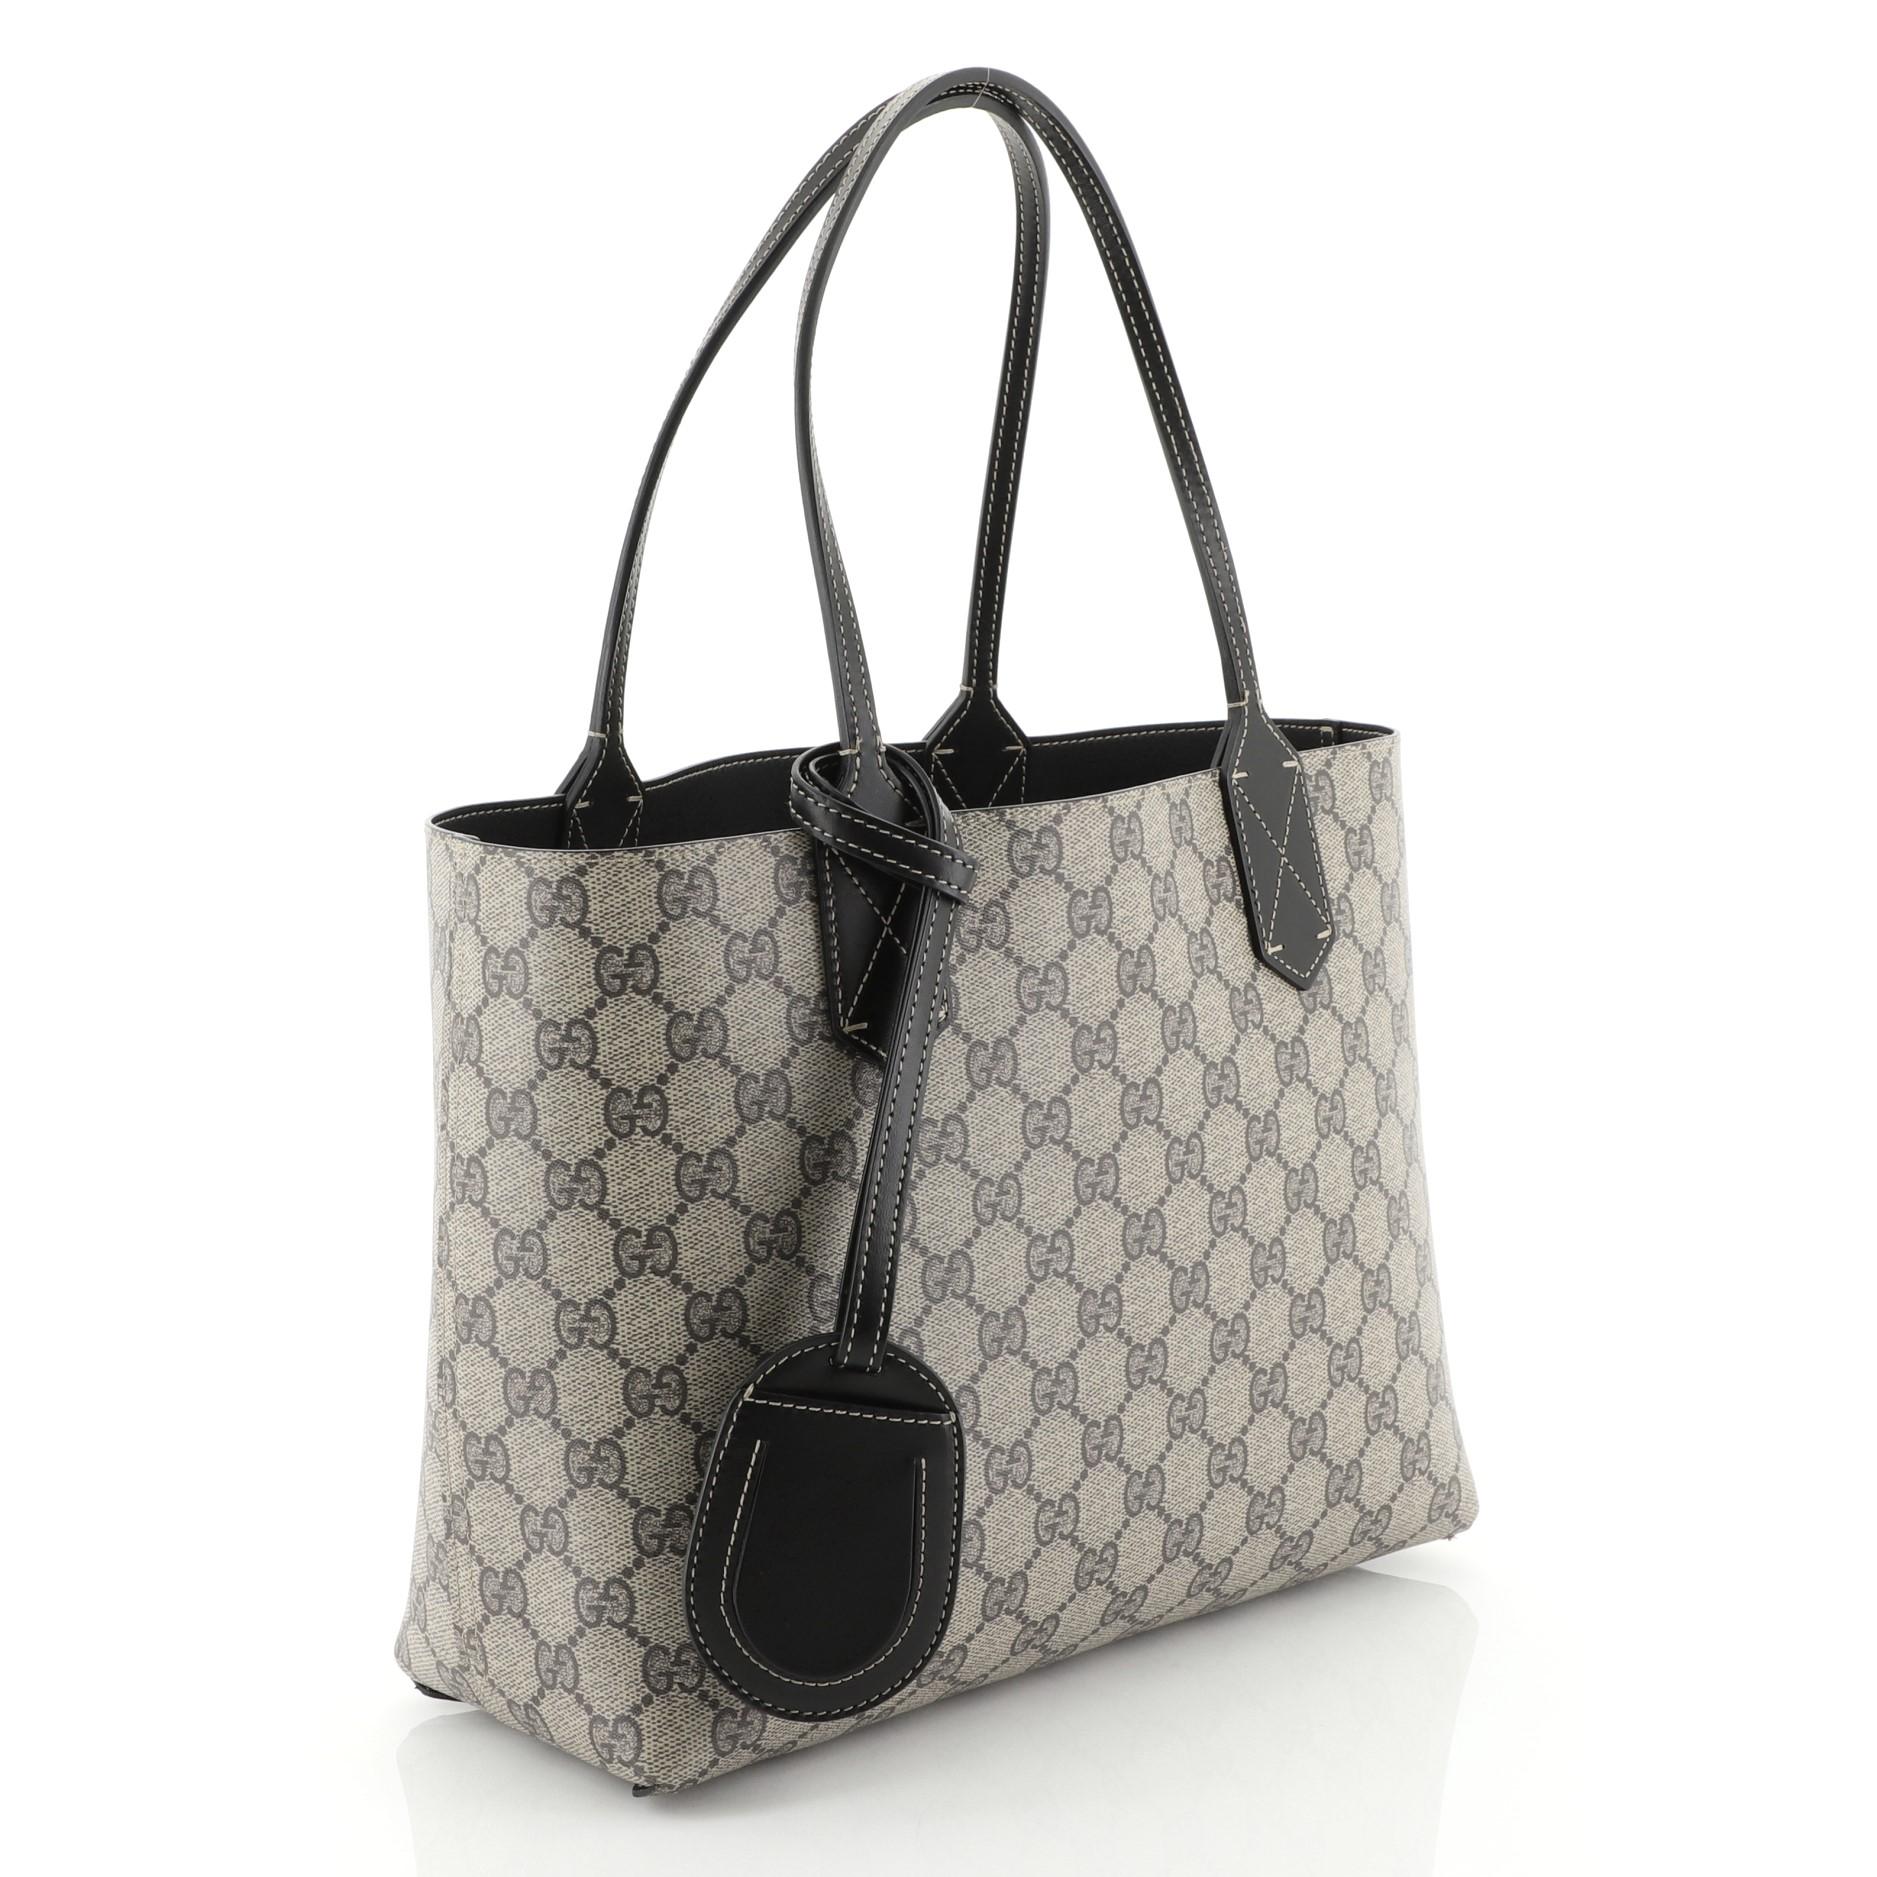 This Gucci Reversible Tote GG Print Leather Small, crafted from brown GG print leather, features tall slim handles and subtle Gucci logo. Its wide top opens to a reversible black leather interior. 

Estimated Retail Price: $950
Condition: Excellent.